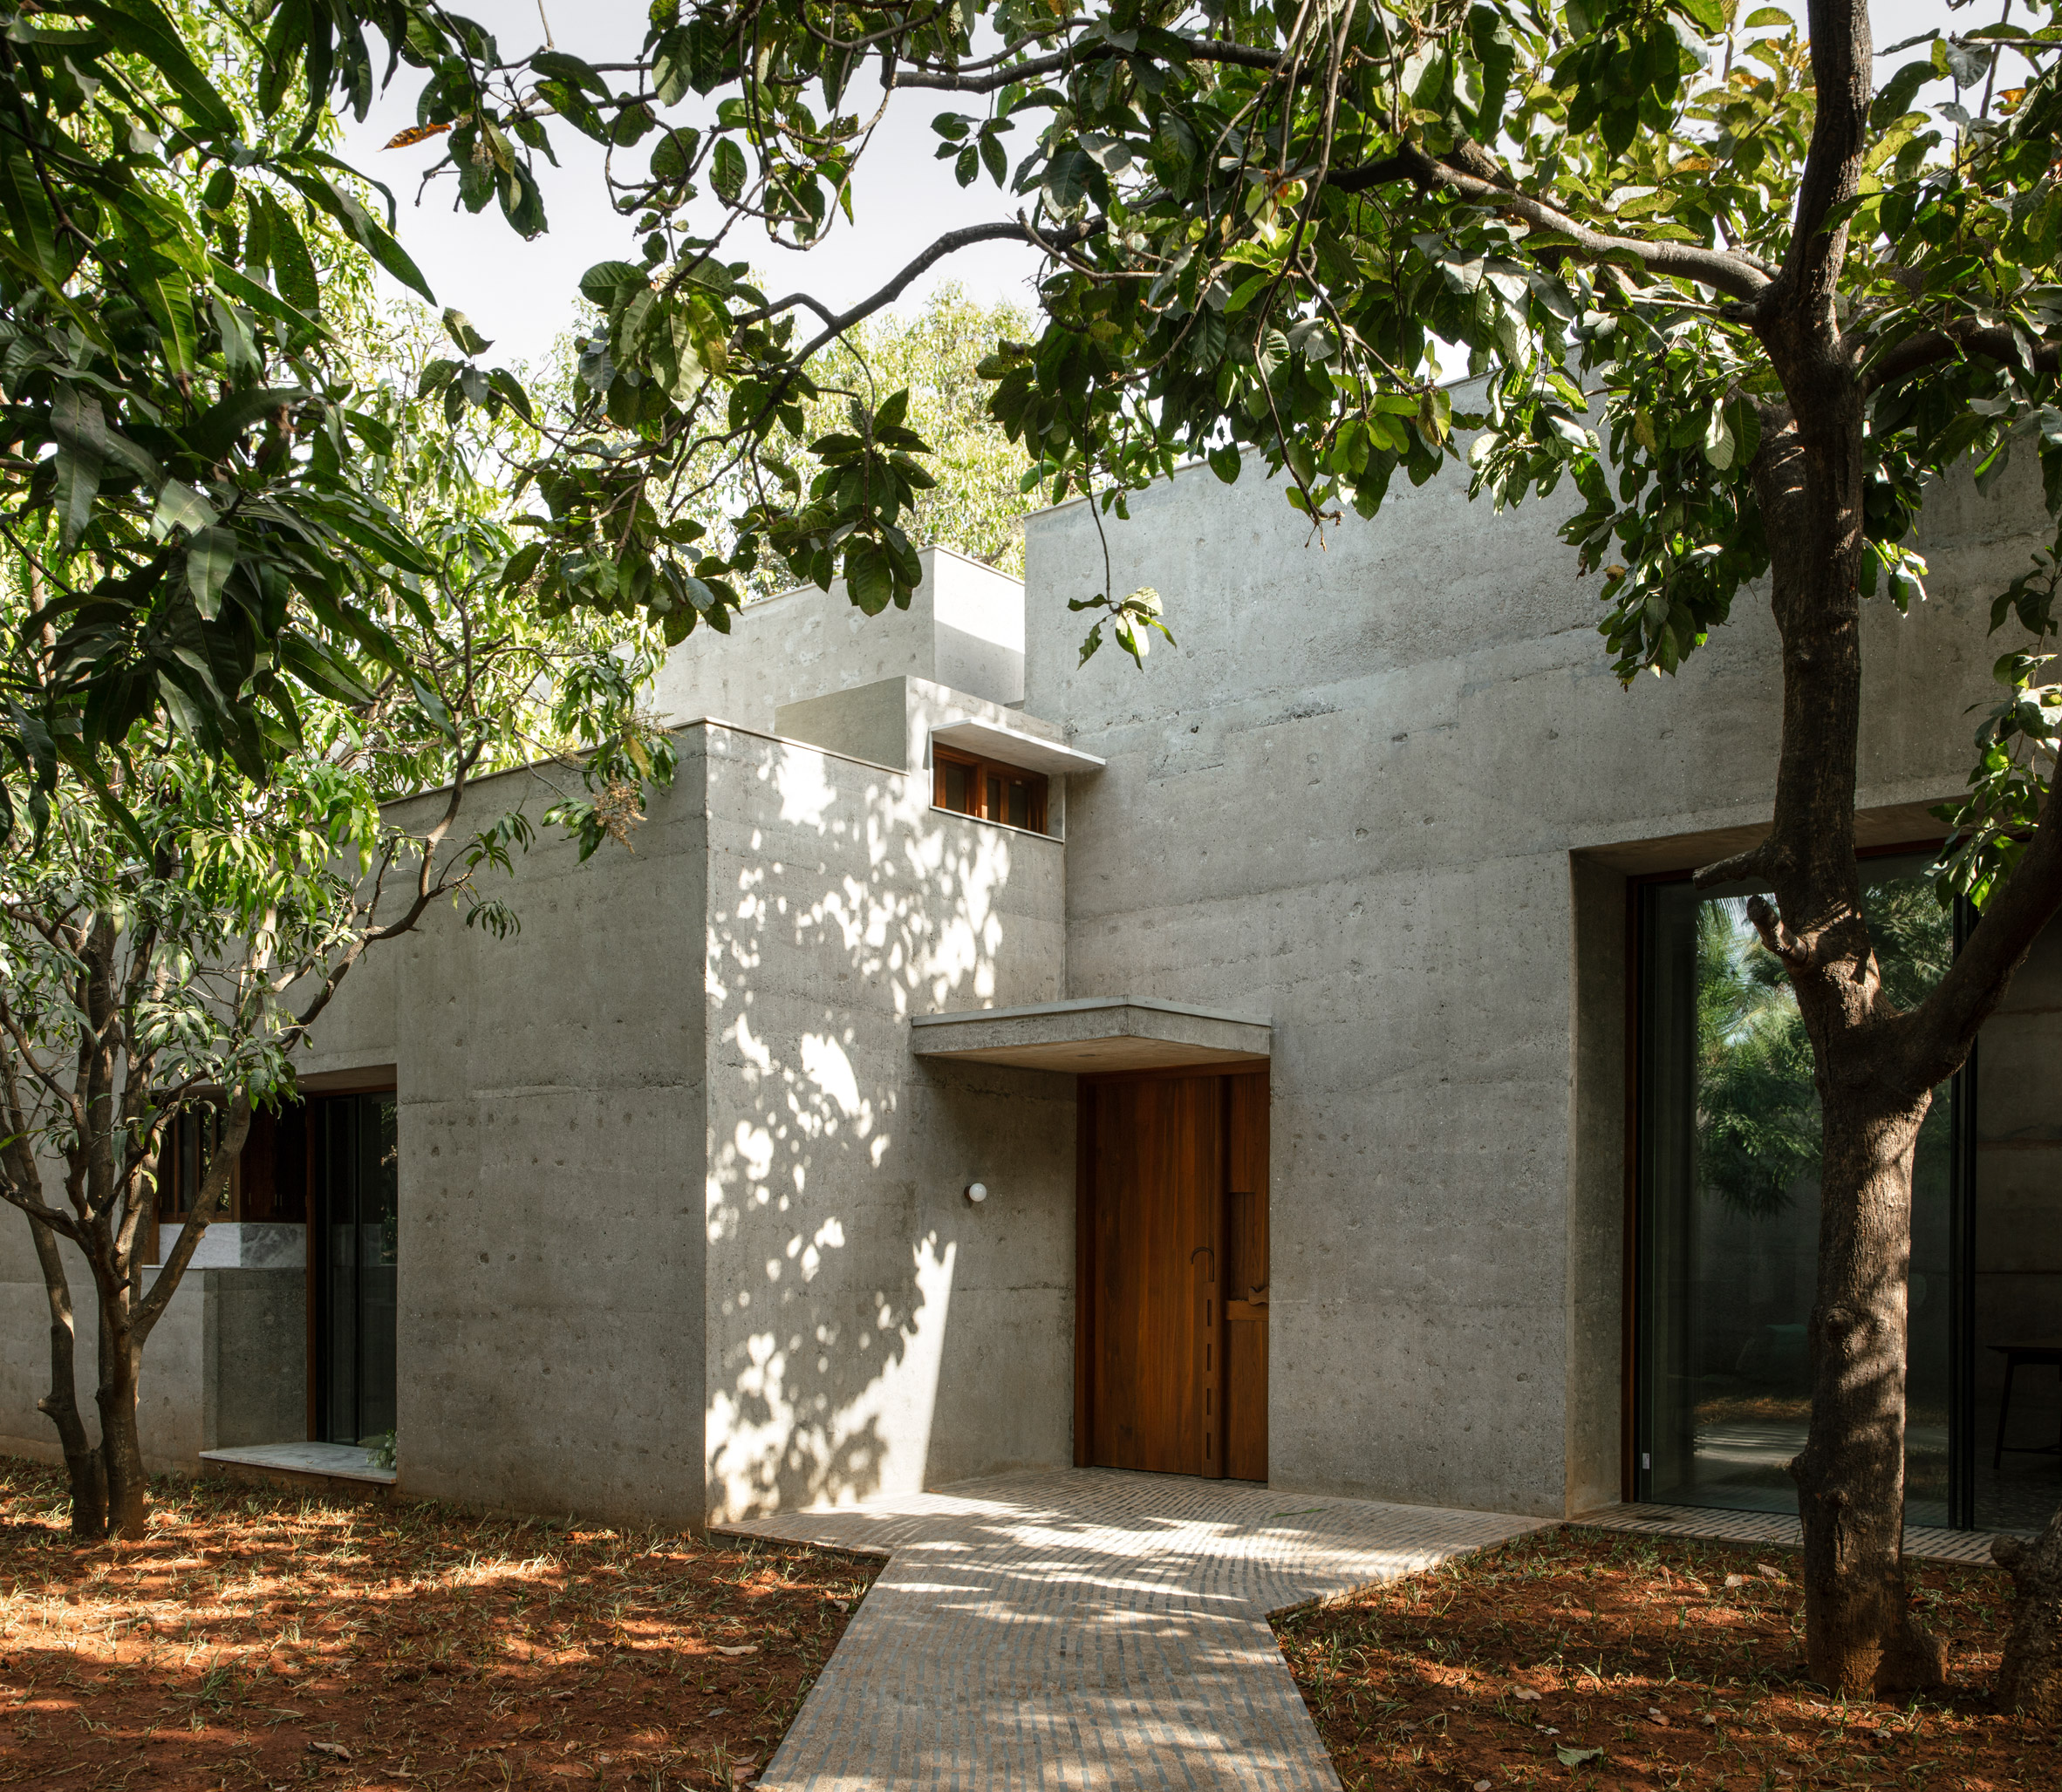 Concrete house in India